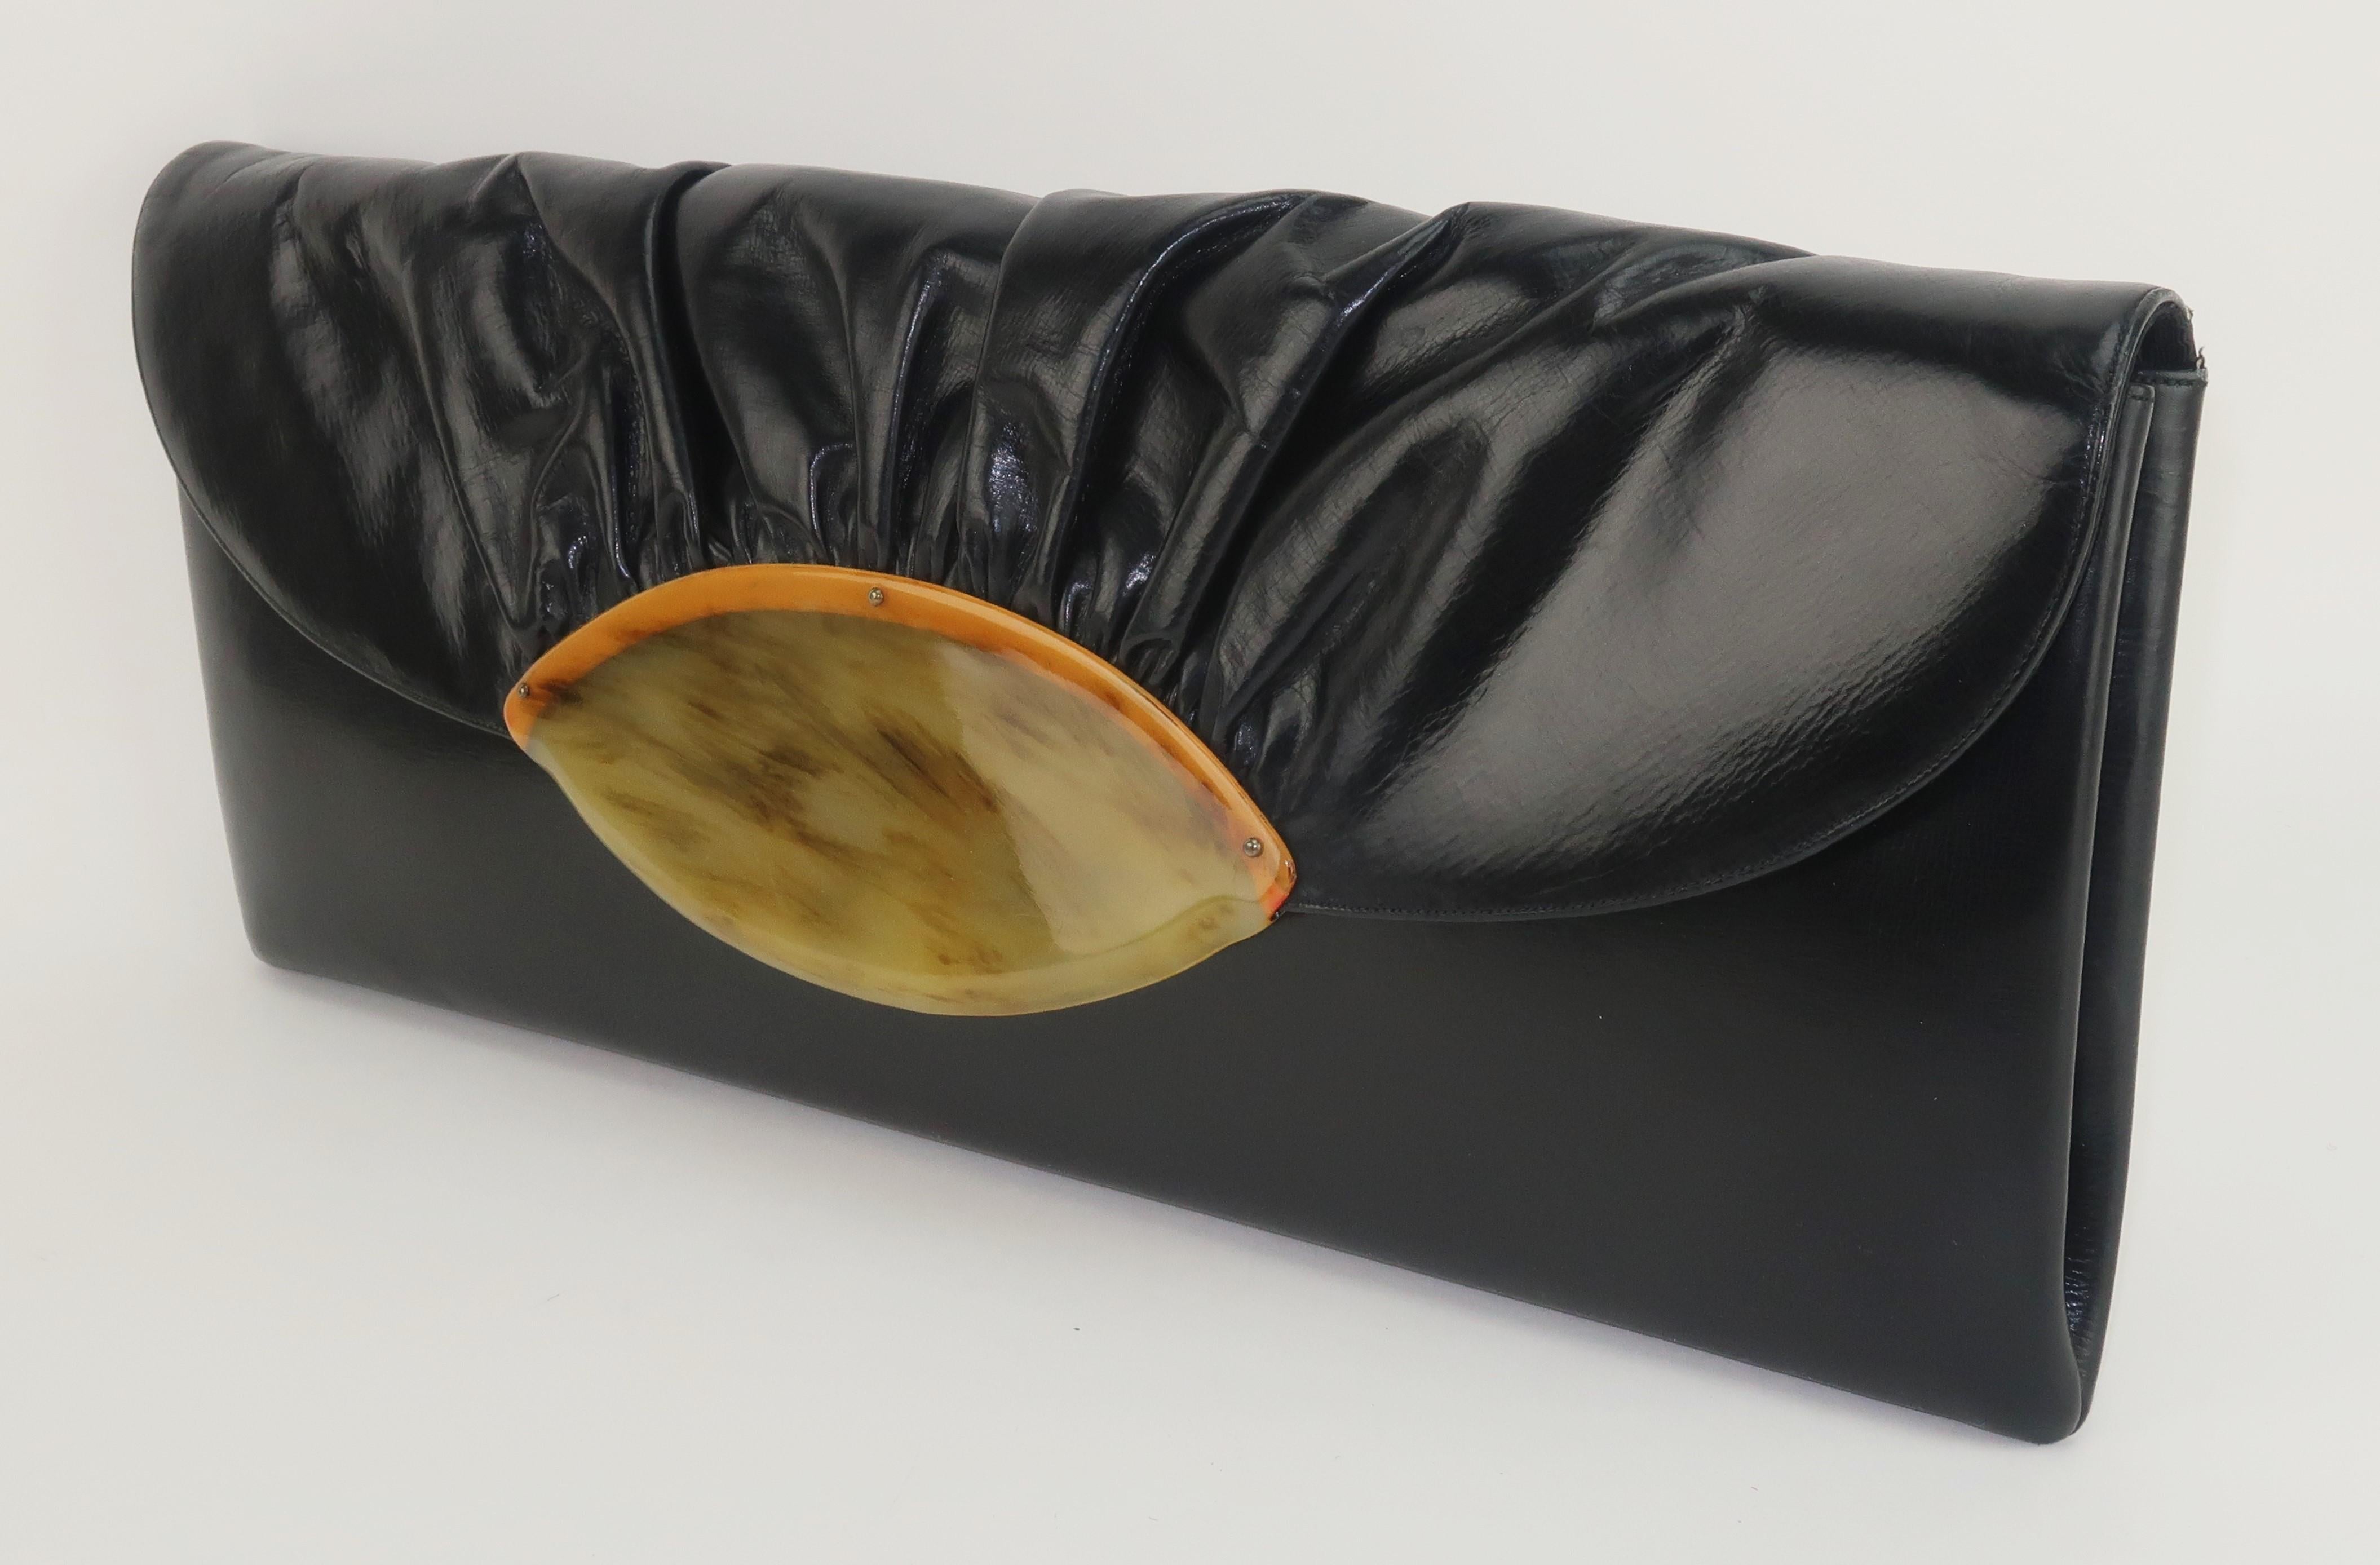 Long, strong and statement making 1940's black leather clutch handbag by American company, Prestige.  The glossy black leather is perfectly enhanced with a ruched front flap and amber lucite embellishment.  The flap opens to reveal an envelope style